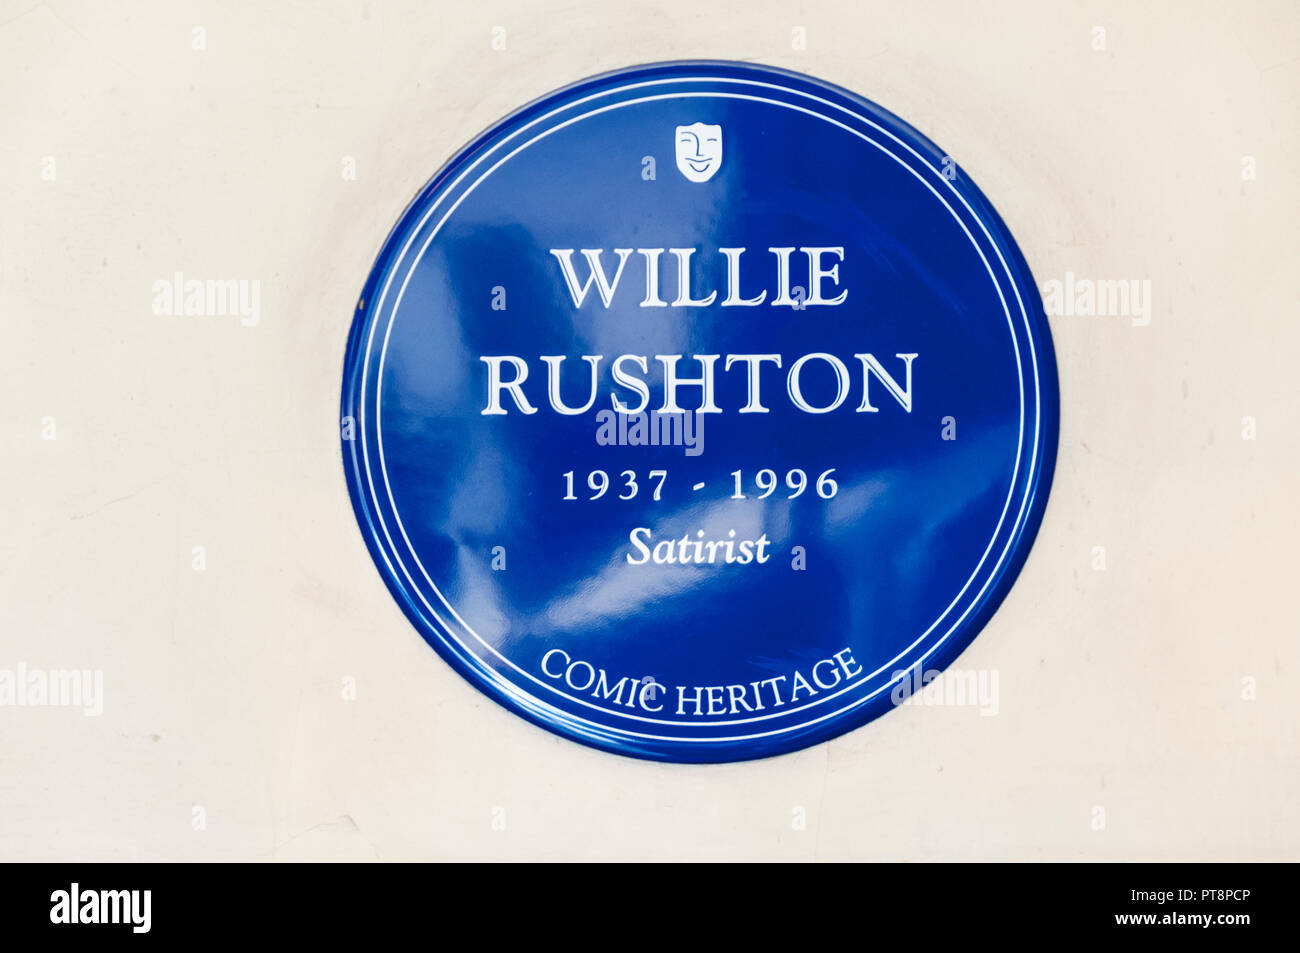 Comic Heritage blue plaque at Mornington Crescent station commemorates Willie Rushton. A reference to the radio programme I'm Sorry I Haven't a Clue. Stock Photo